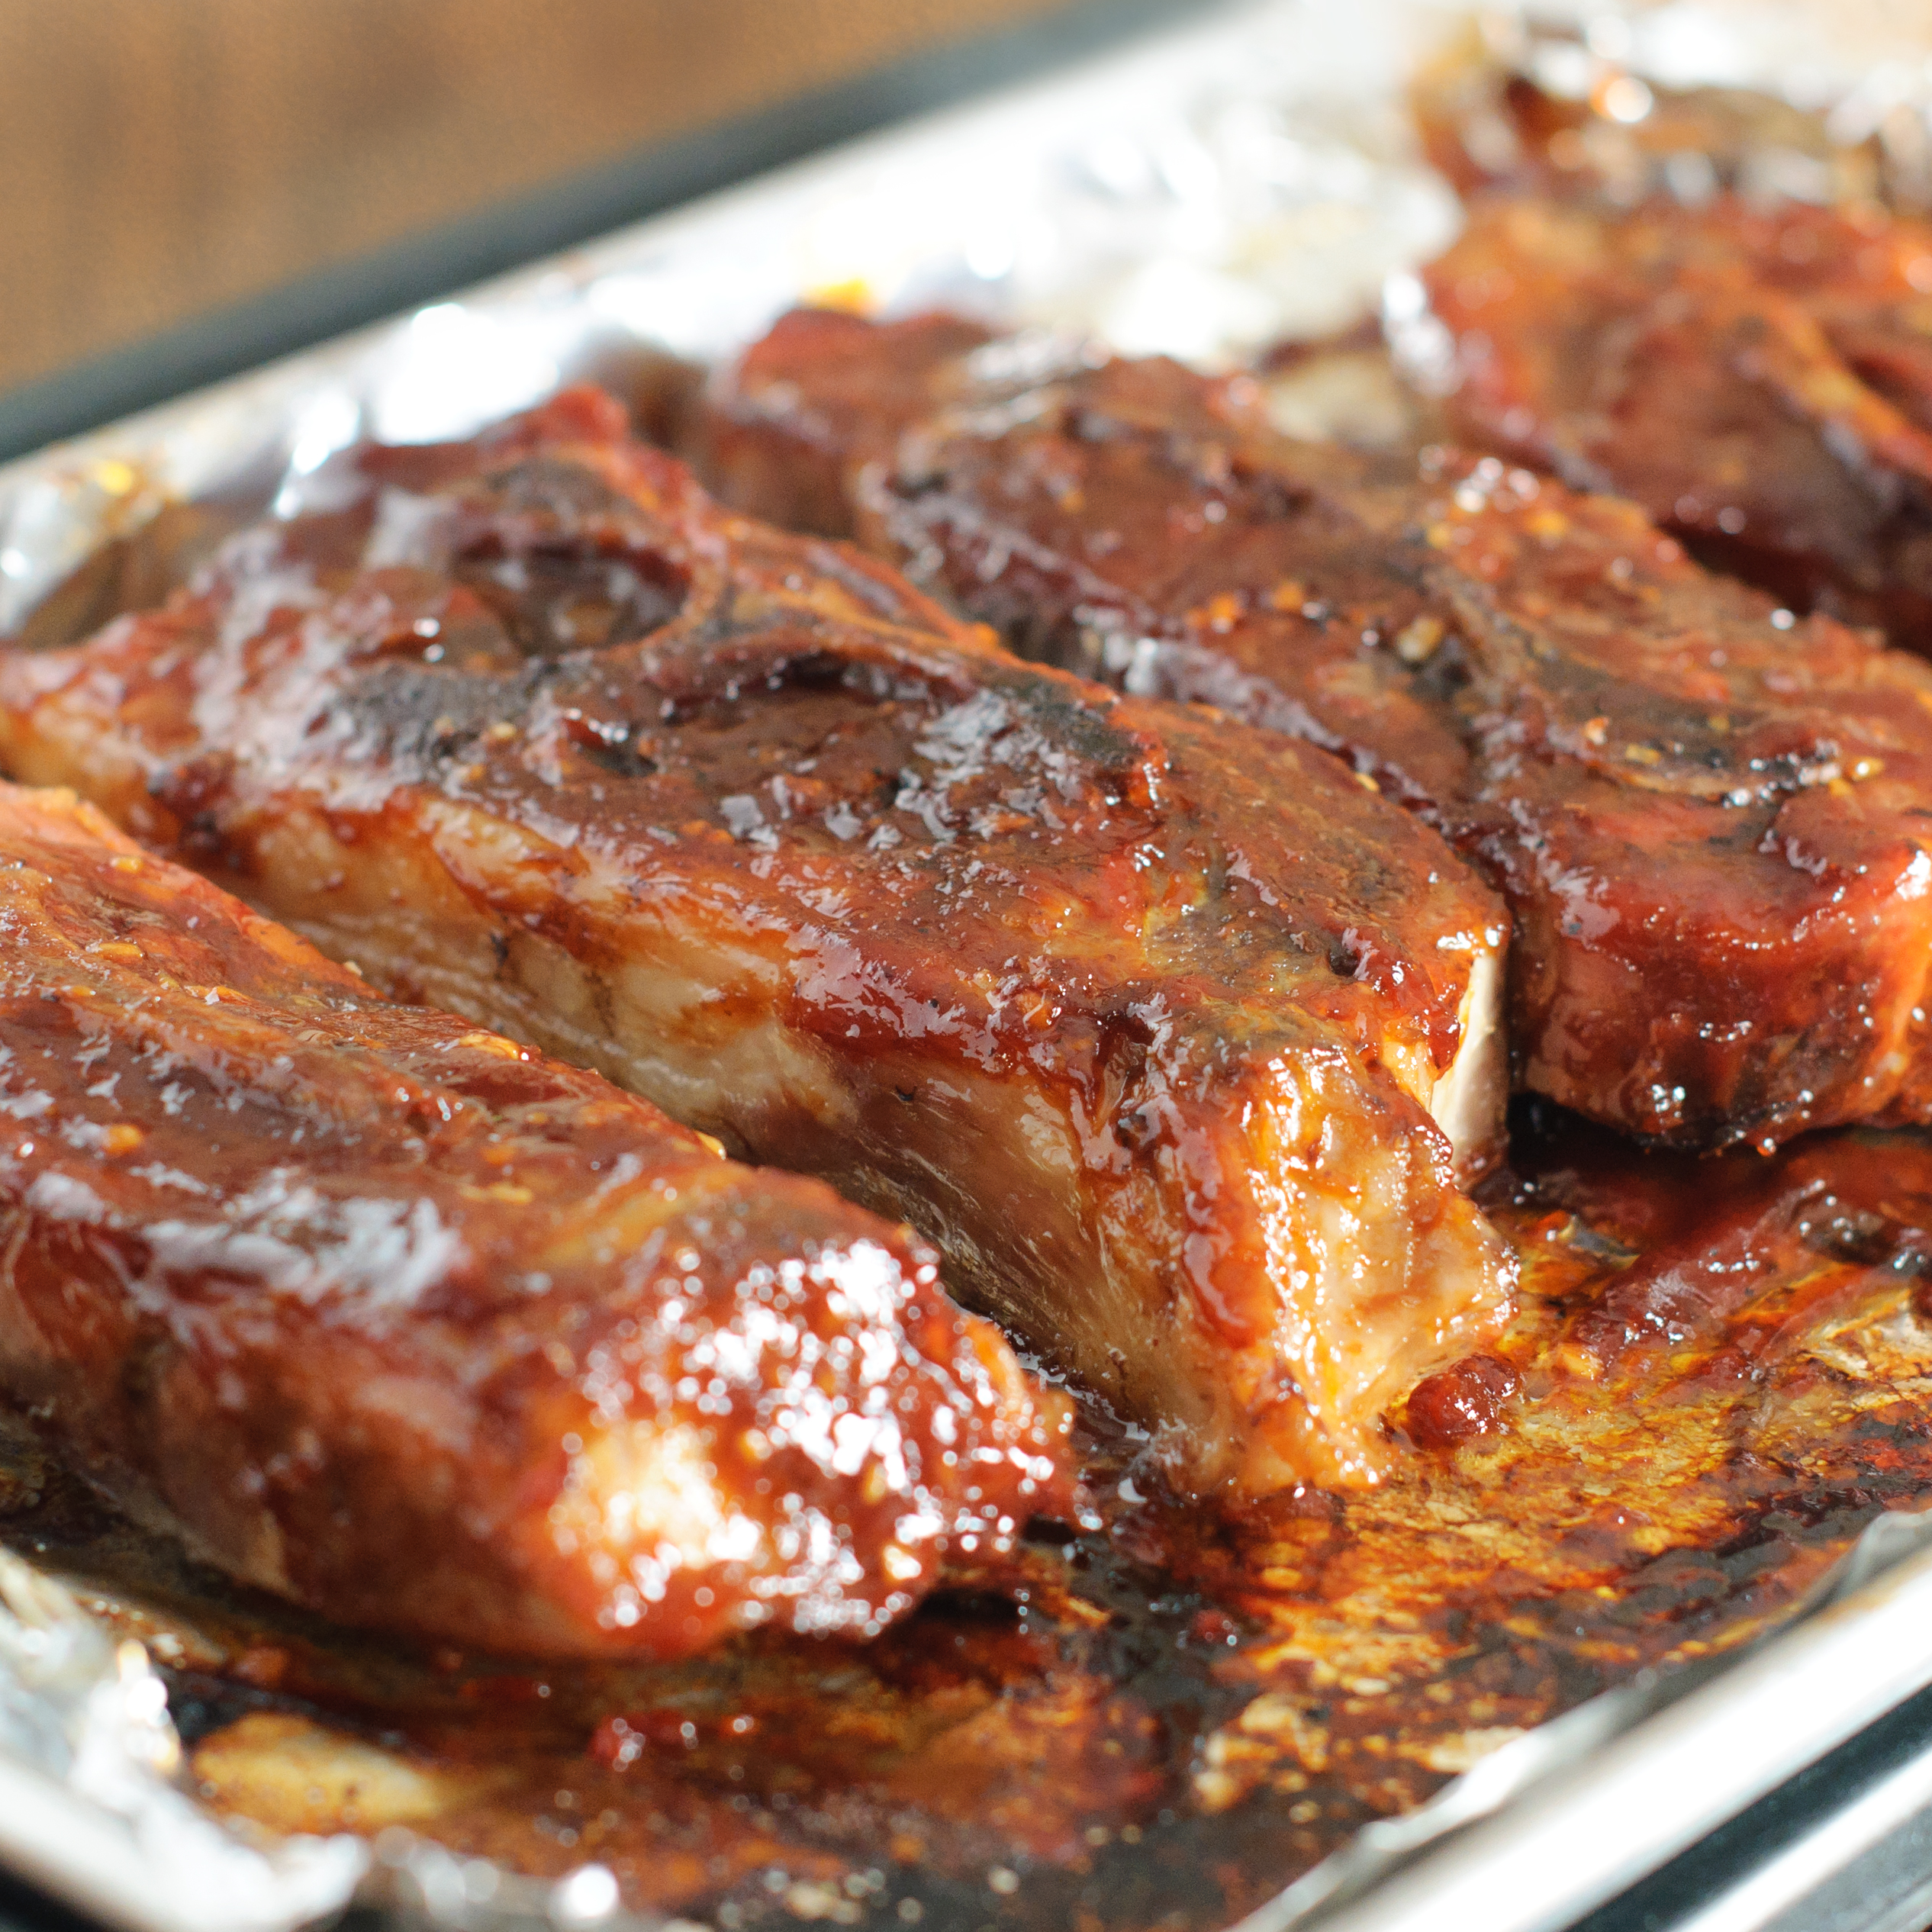 Bbq Country Style Ribs Recipe Allrecipes,Is Chocolate Vegan